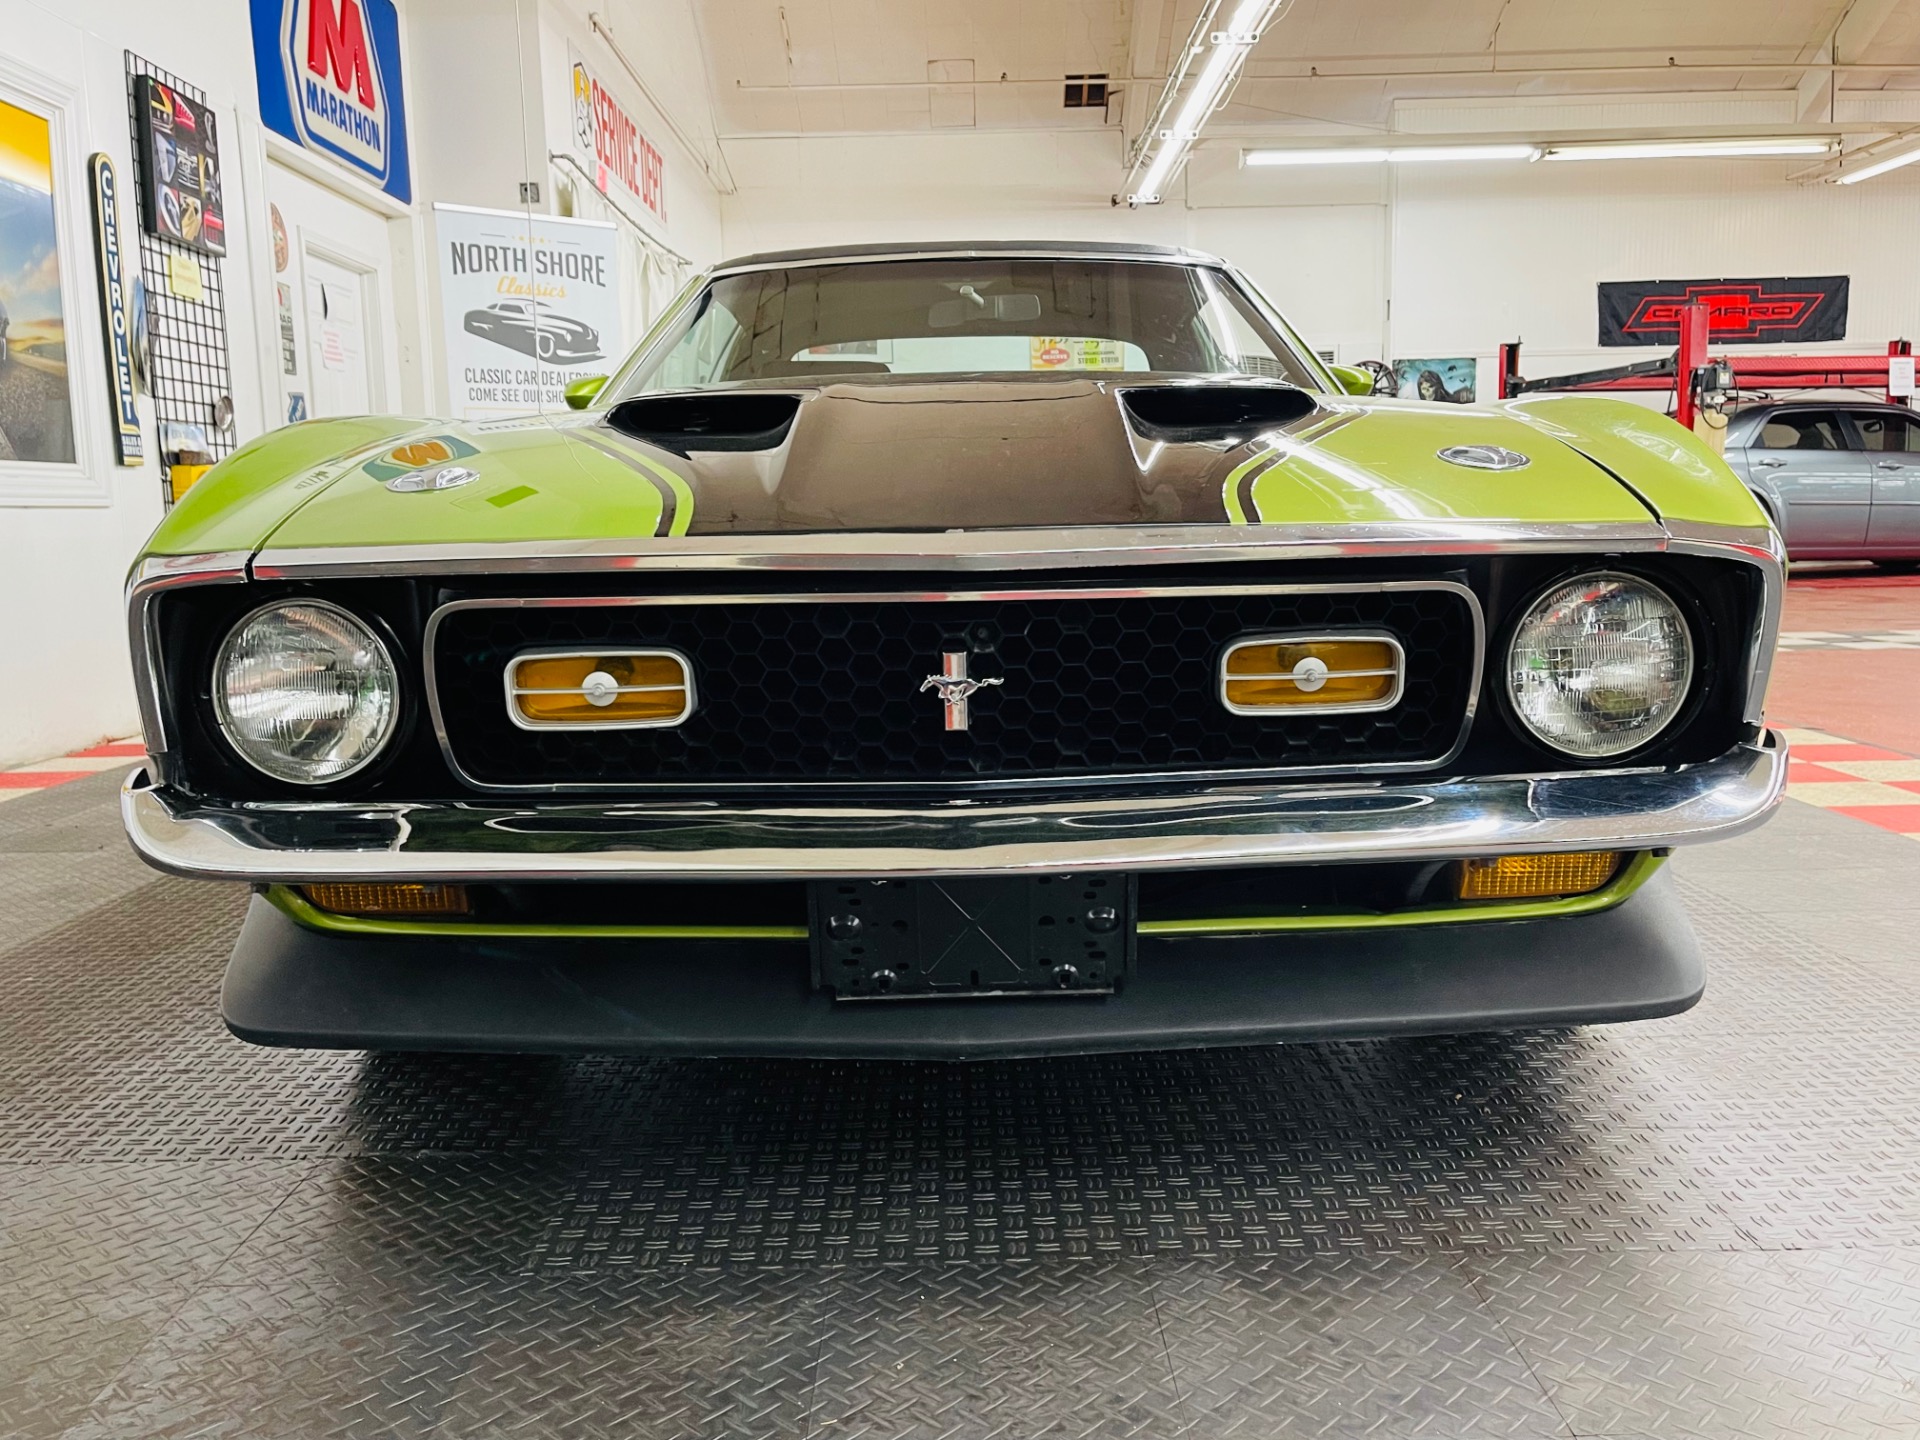 Used 1972 Ford Mustang - GRANDE COUPE - 302 V8 ENGINE - | Mundelein, IL